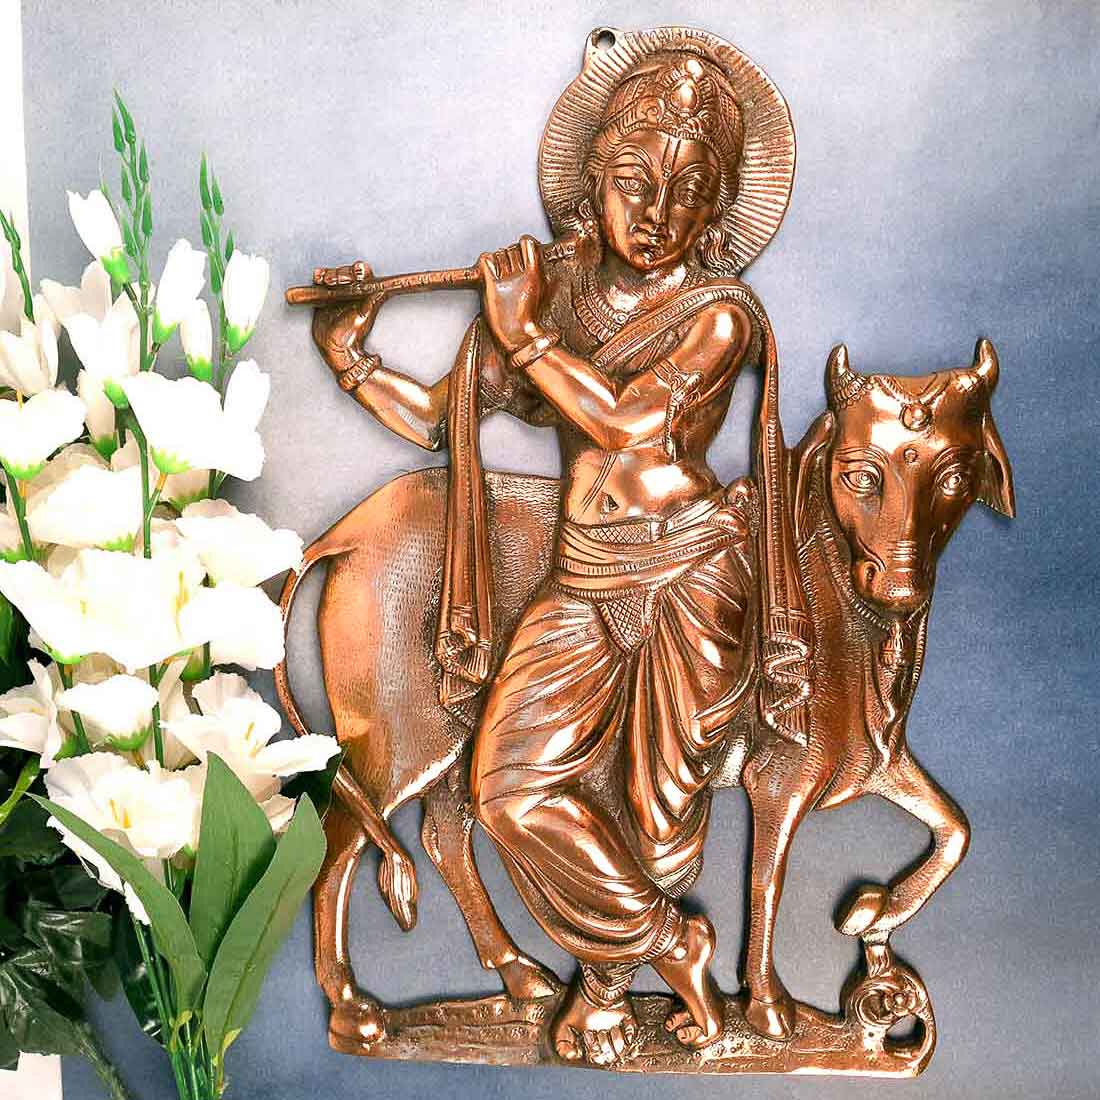 Shri Krishna Wall Hanging Idol | Lord Krishna Playing Flute With Cow Wall Hanging  Statue Murti | Religious & Spiritual Art Sculpture - for Gift, Home, Living Room, Office, Puja Room Decoration  - 22 Inch